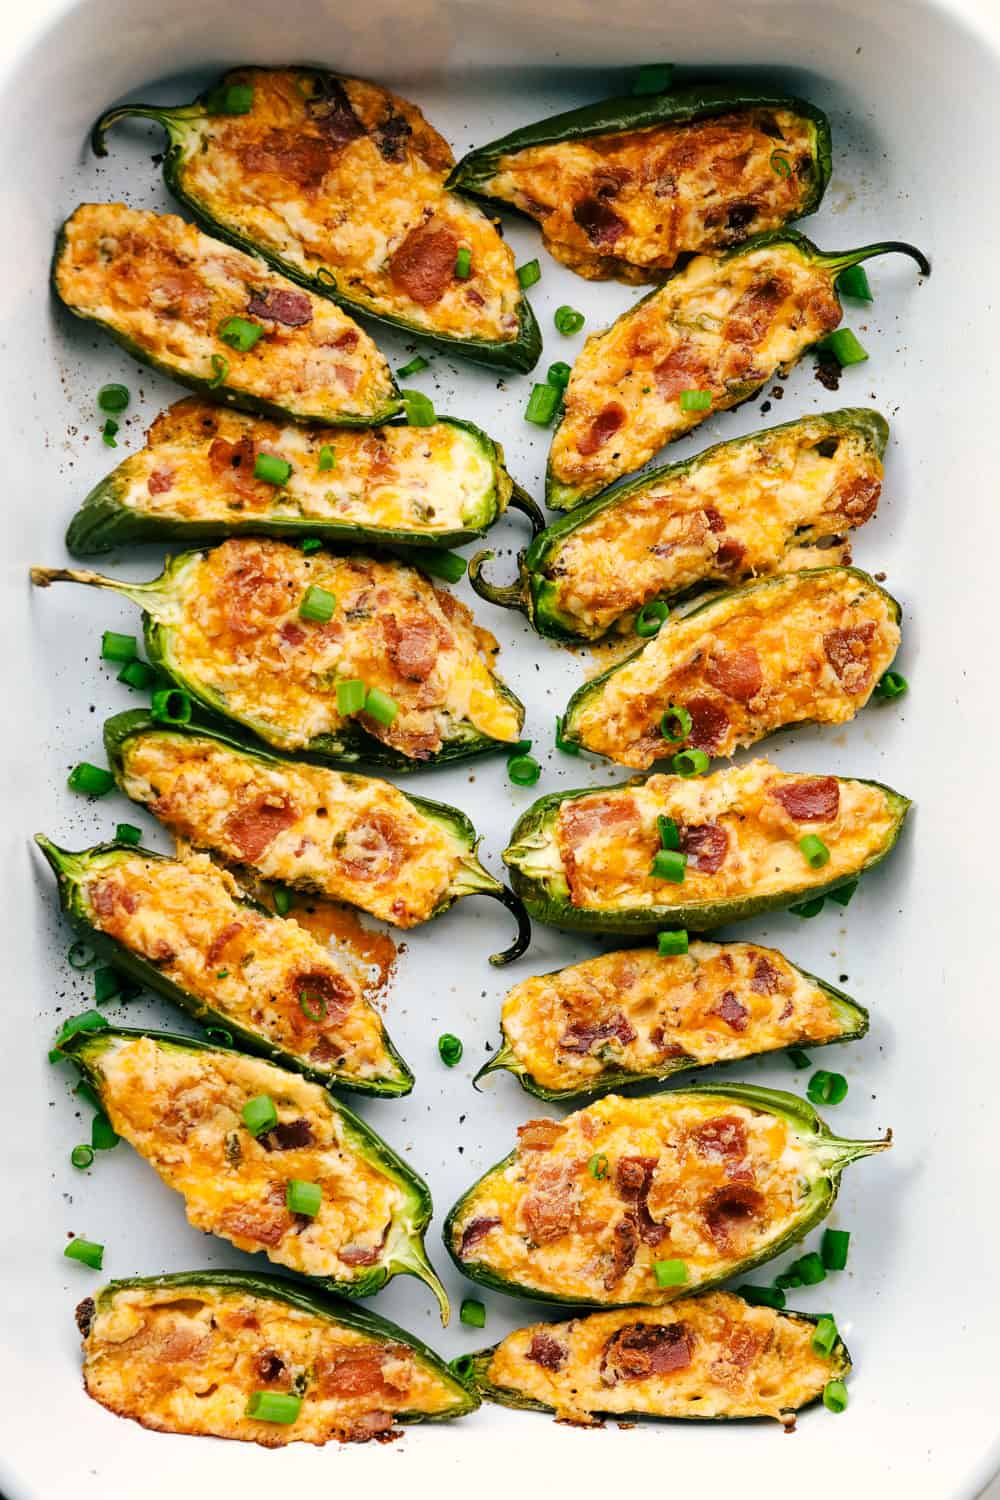 Jalapeño poppers being baked.